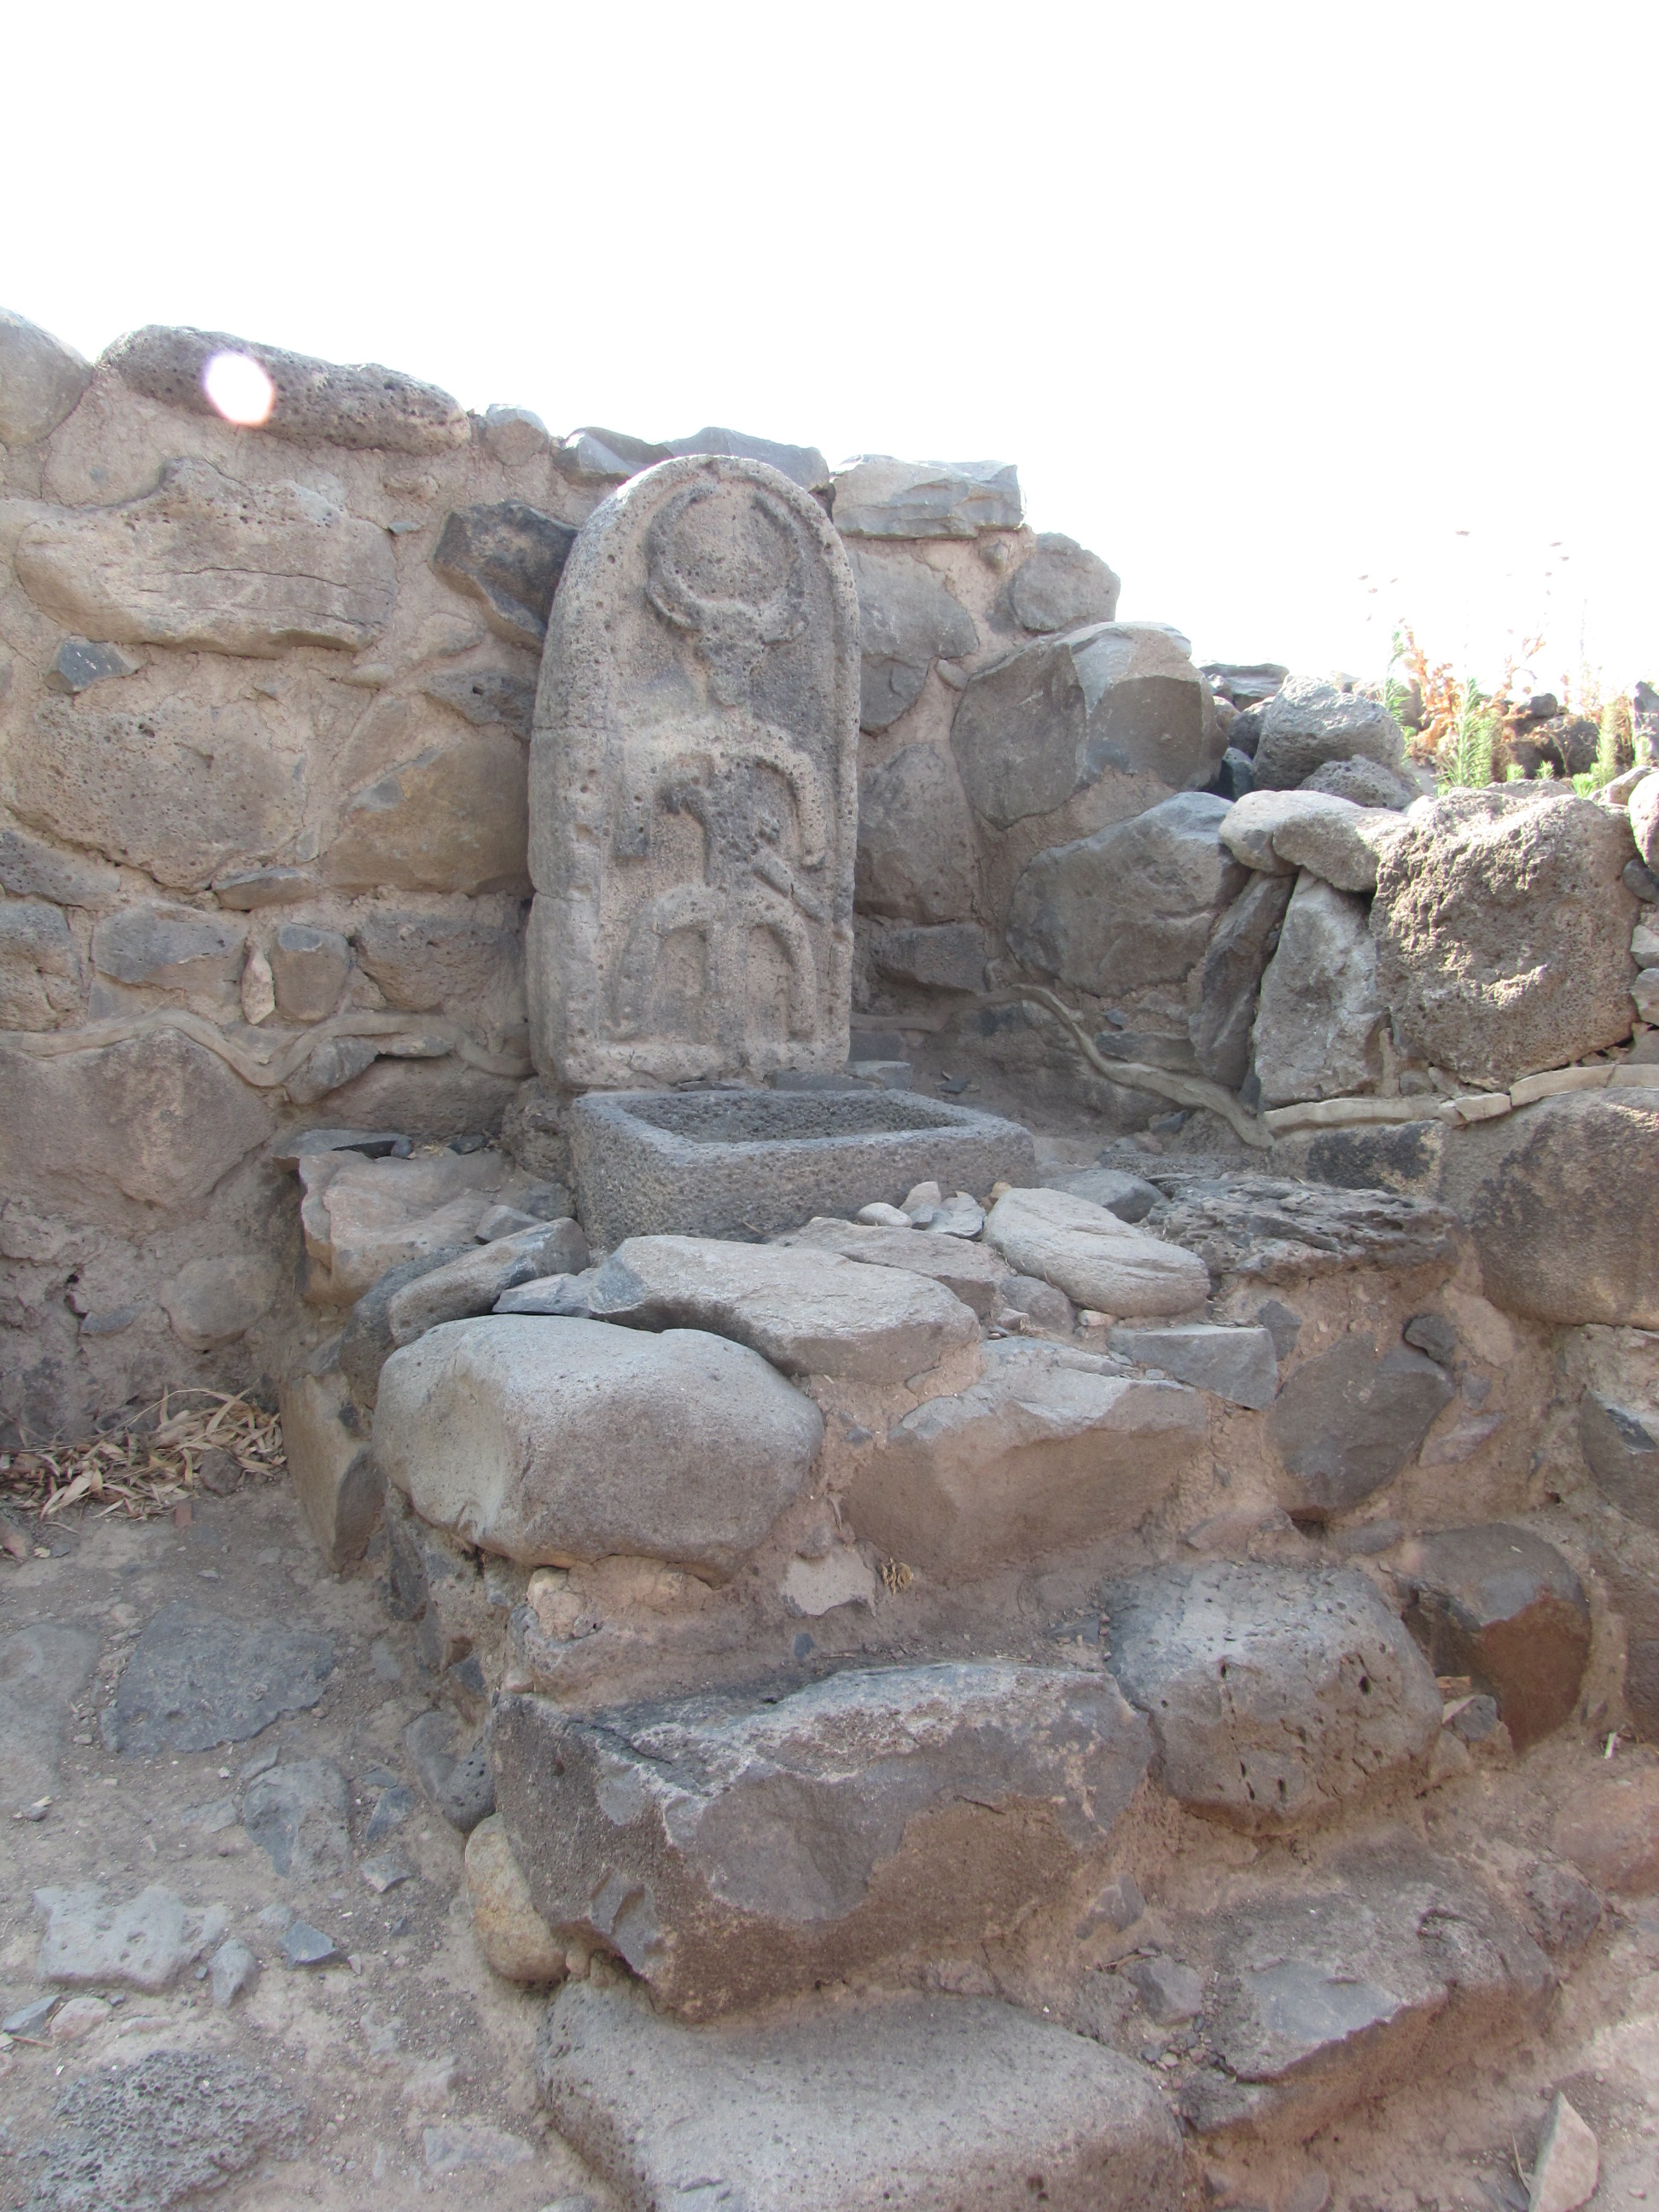 Geshur high place with three steps up to the basin for offerings to Hadad stella, an inscribed standing stone